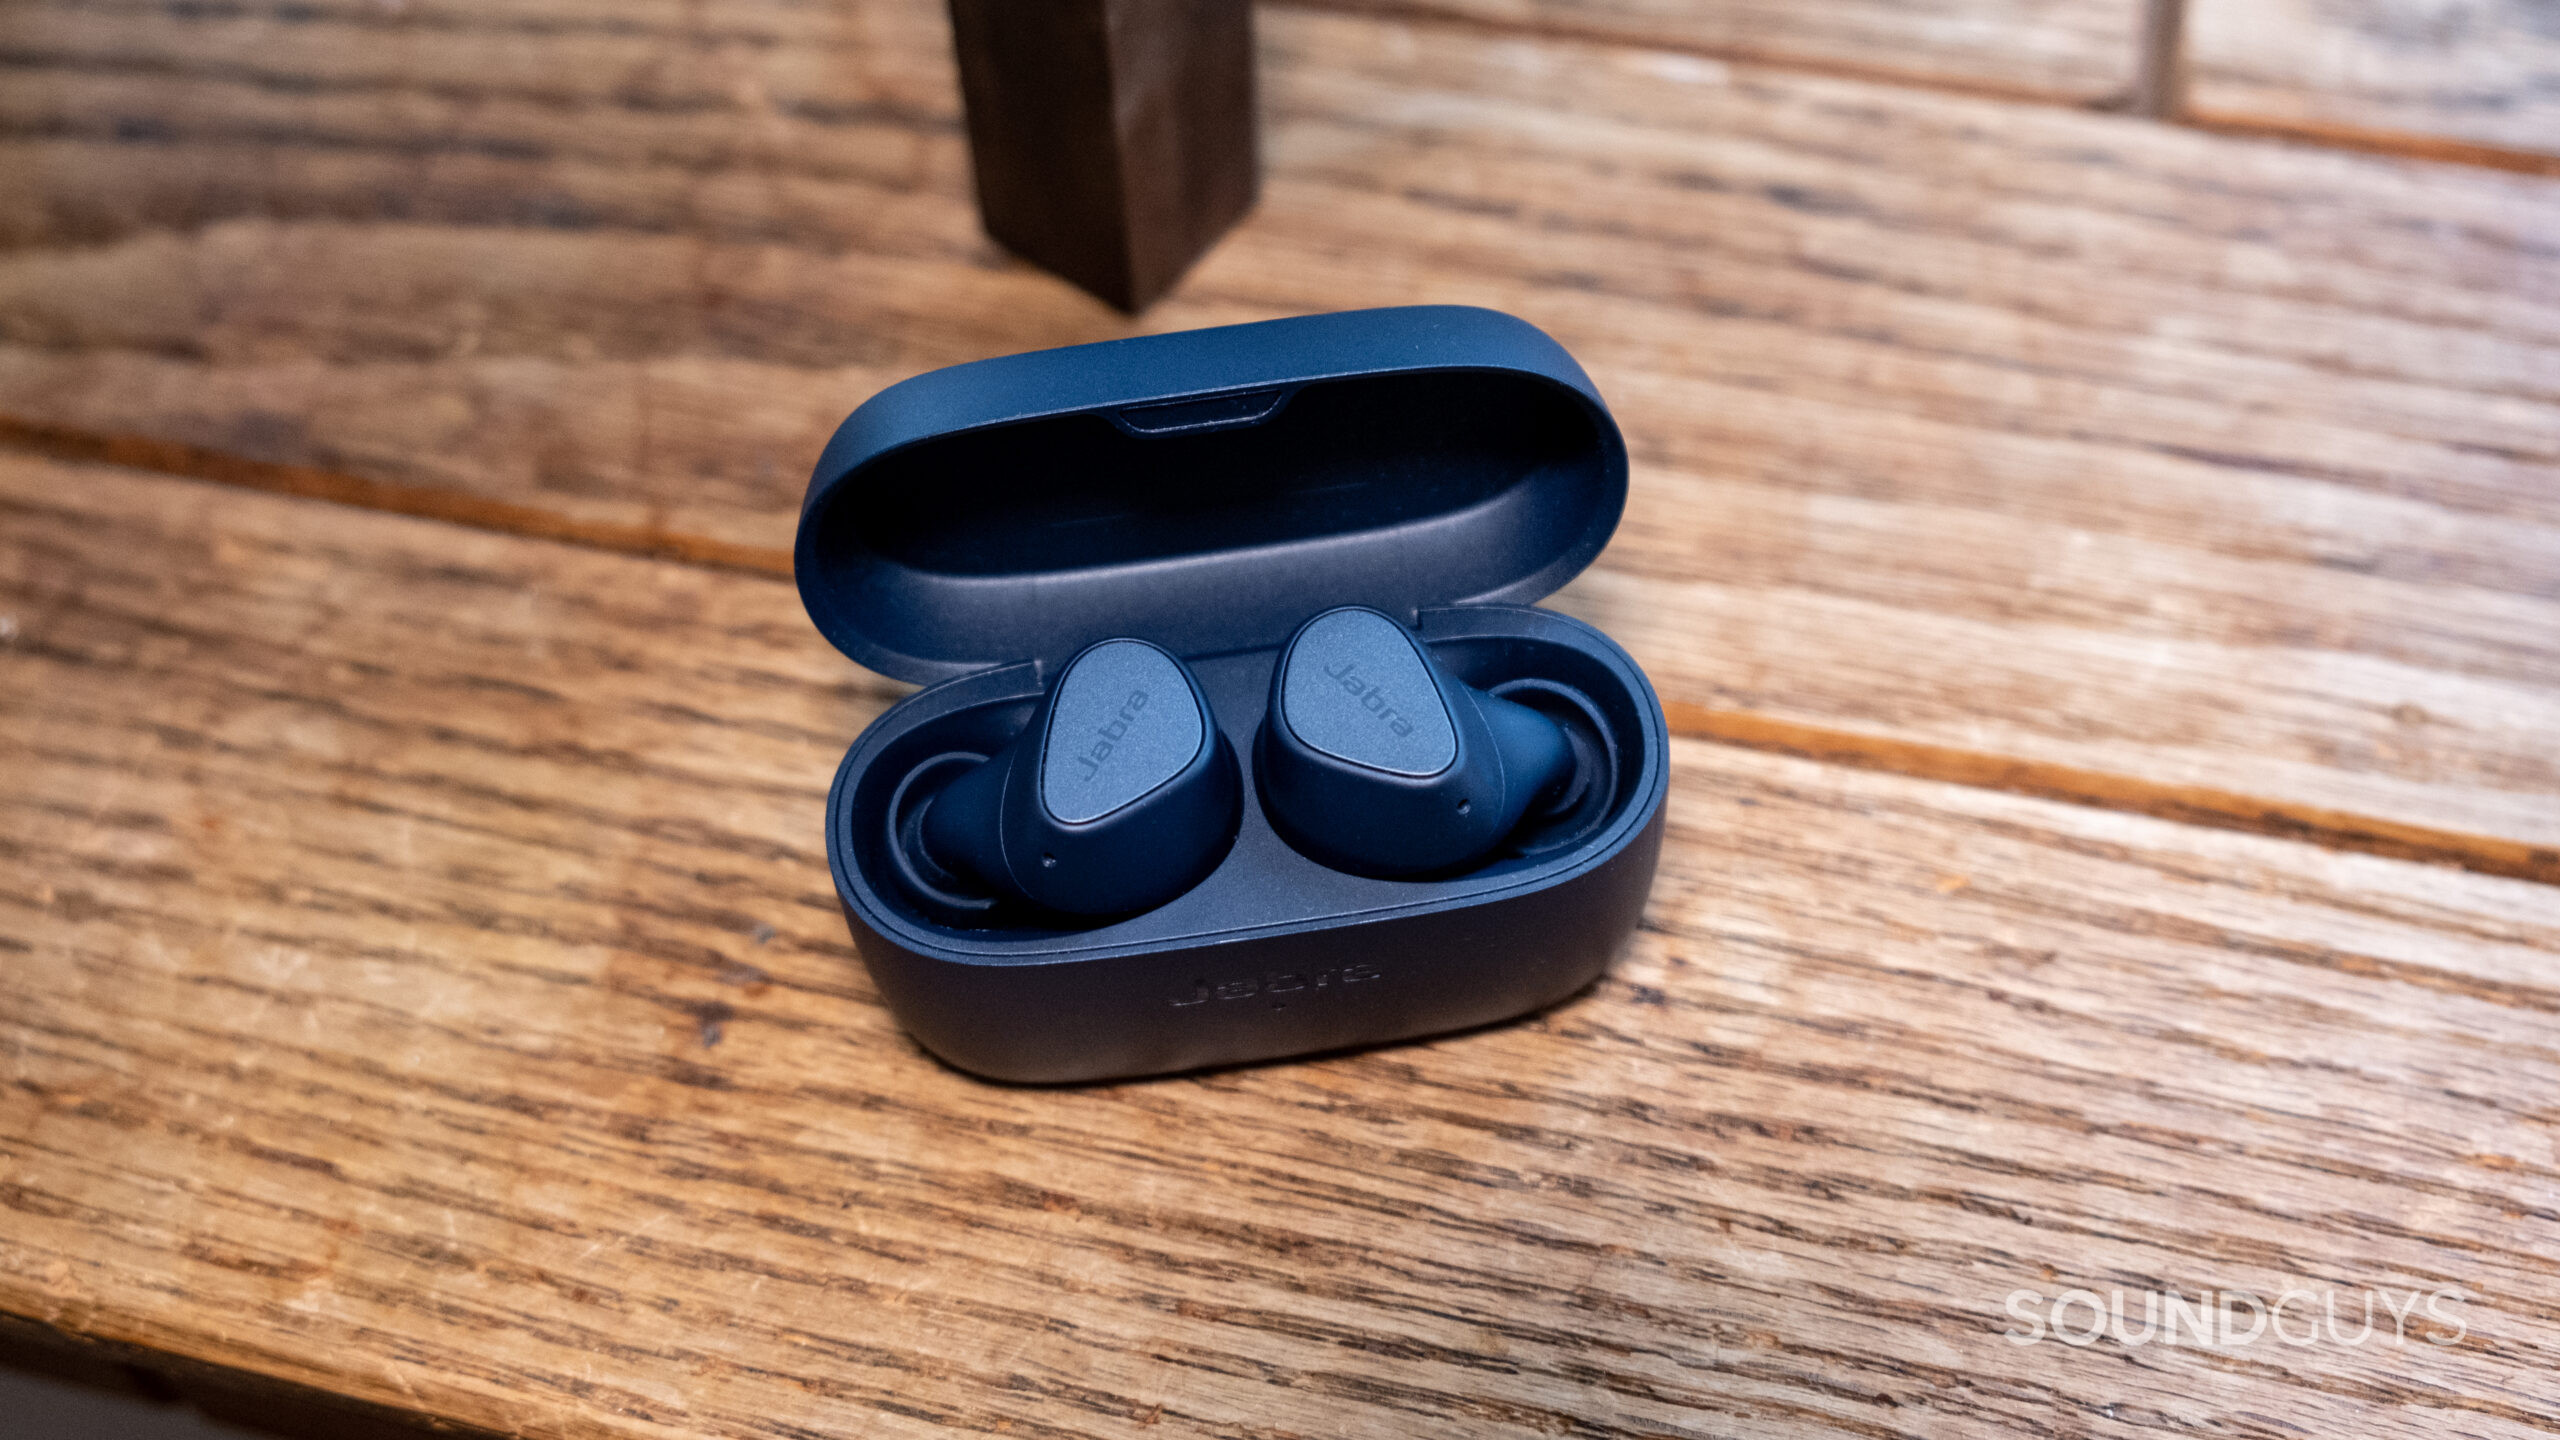 The Jabra Elite 4 sits on a wood surface with the case open showcasing the buds.